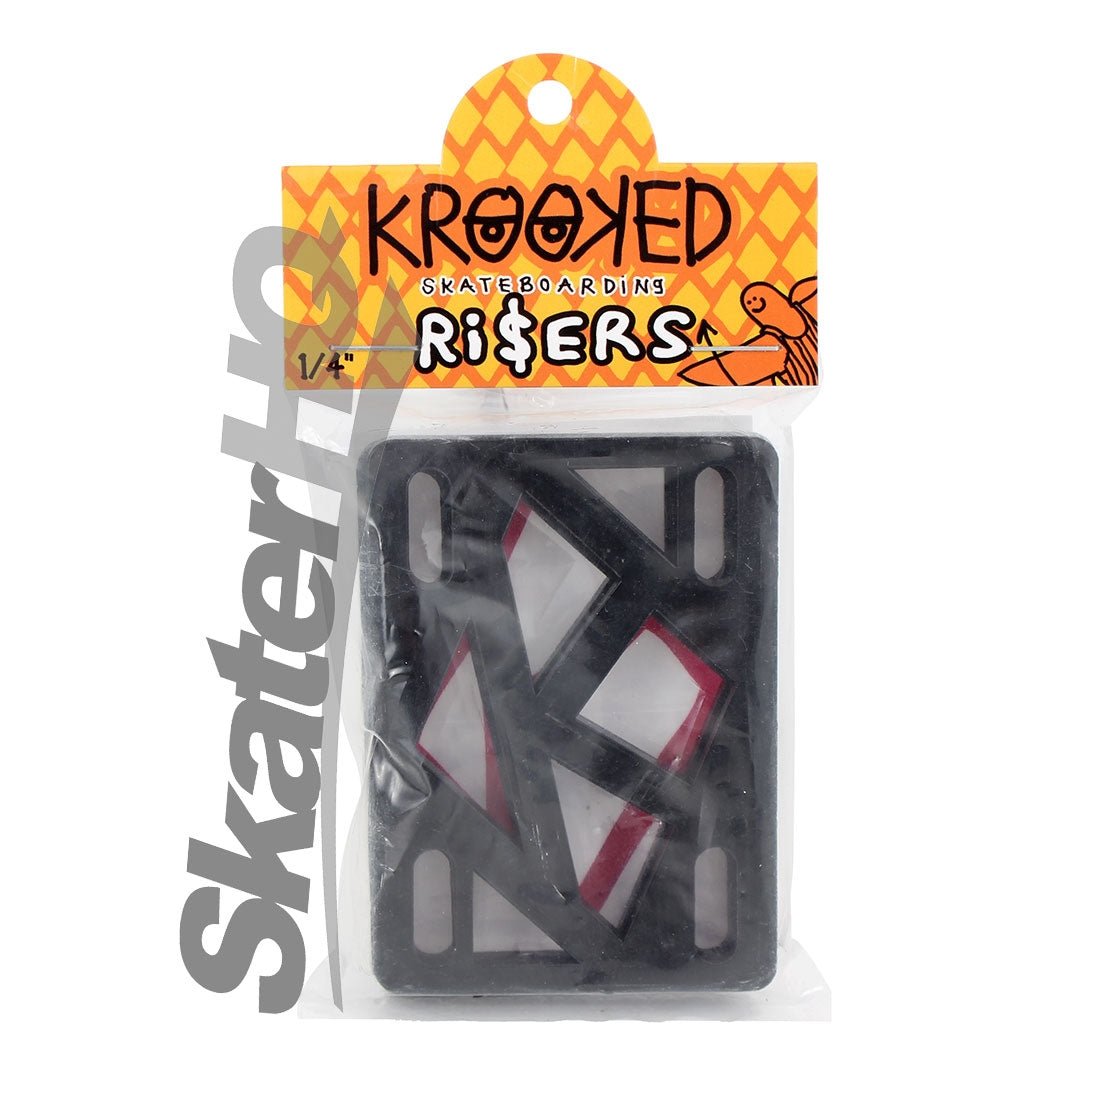 Krooked 1/4 Inch Hard Risers Skateboard Hardware and Parts